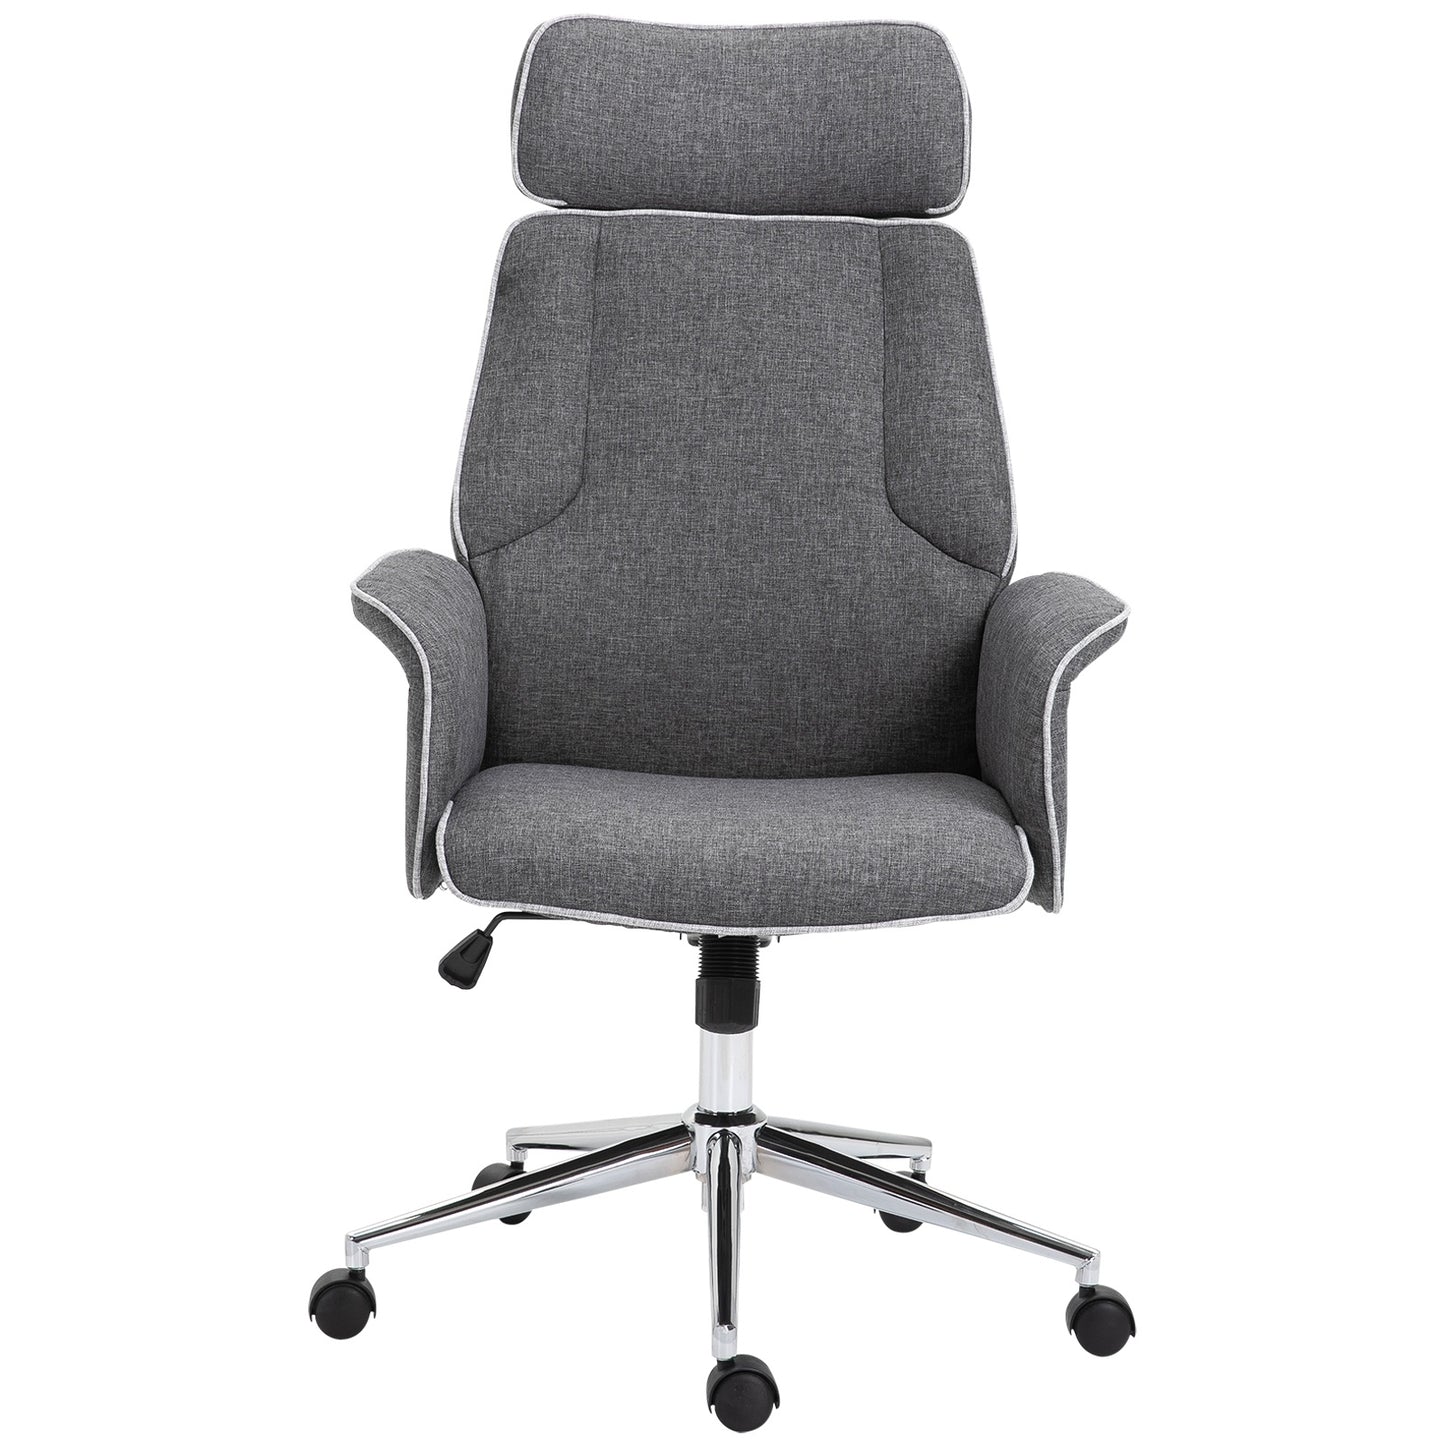 Vinsetto Desk Rocking Chair for Office Executive Adjustable High Back on Wheels Grey